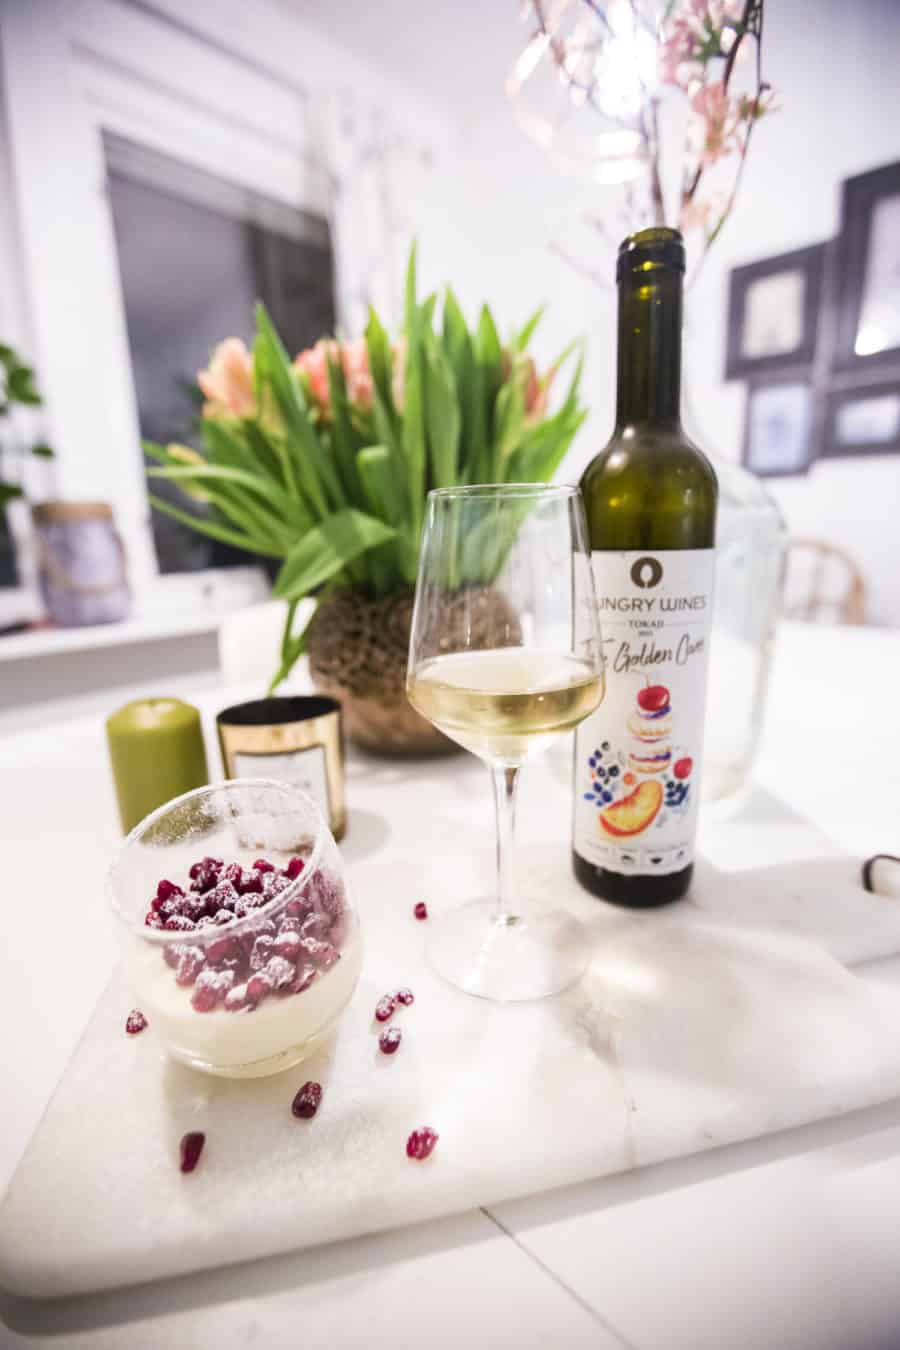 Hungry Wines The Golden Cuvée - Sweet wine from Tokaji on the base of Furmint and other local grapes, and pannacotta topped with berries